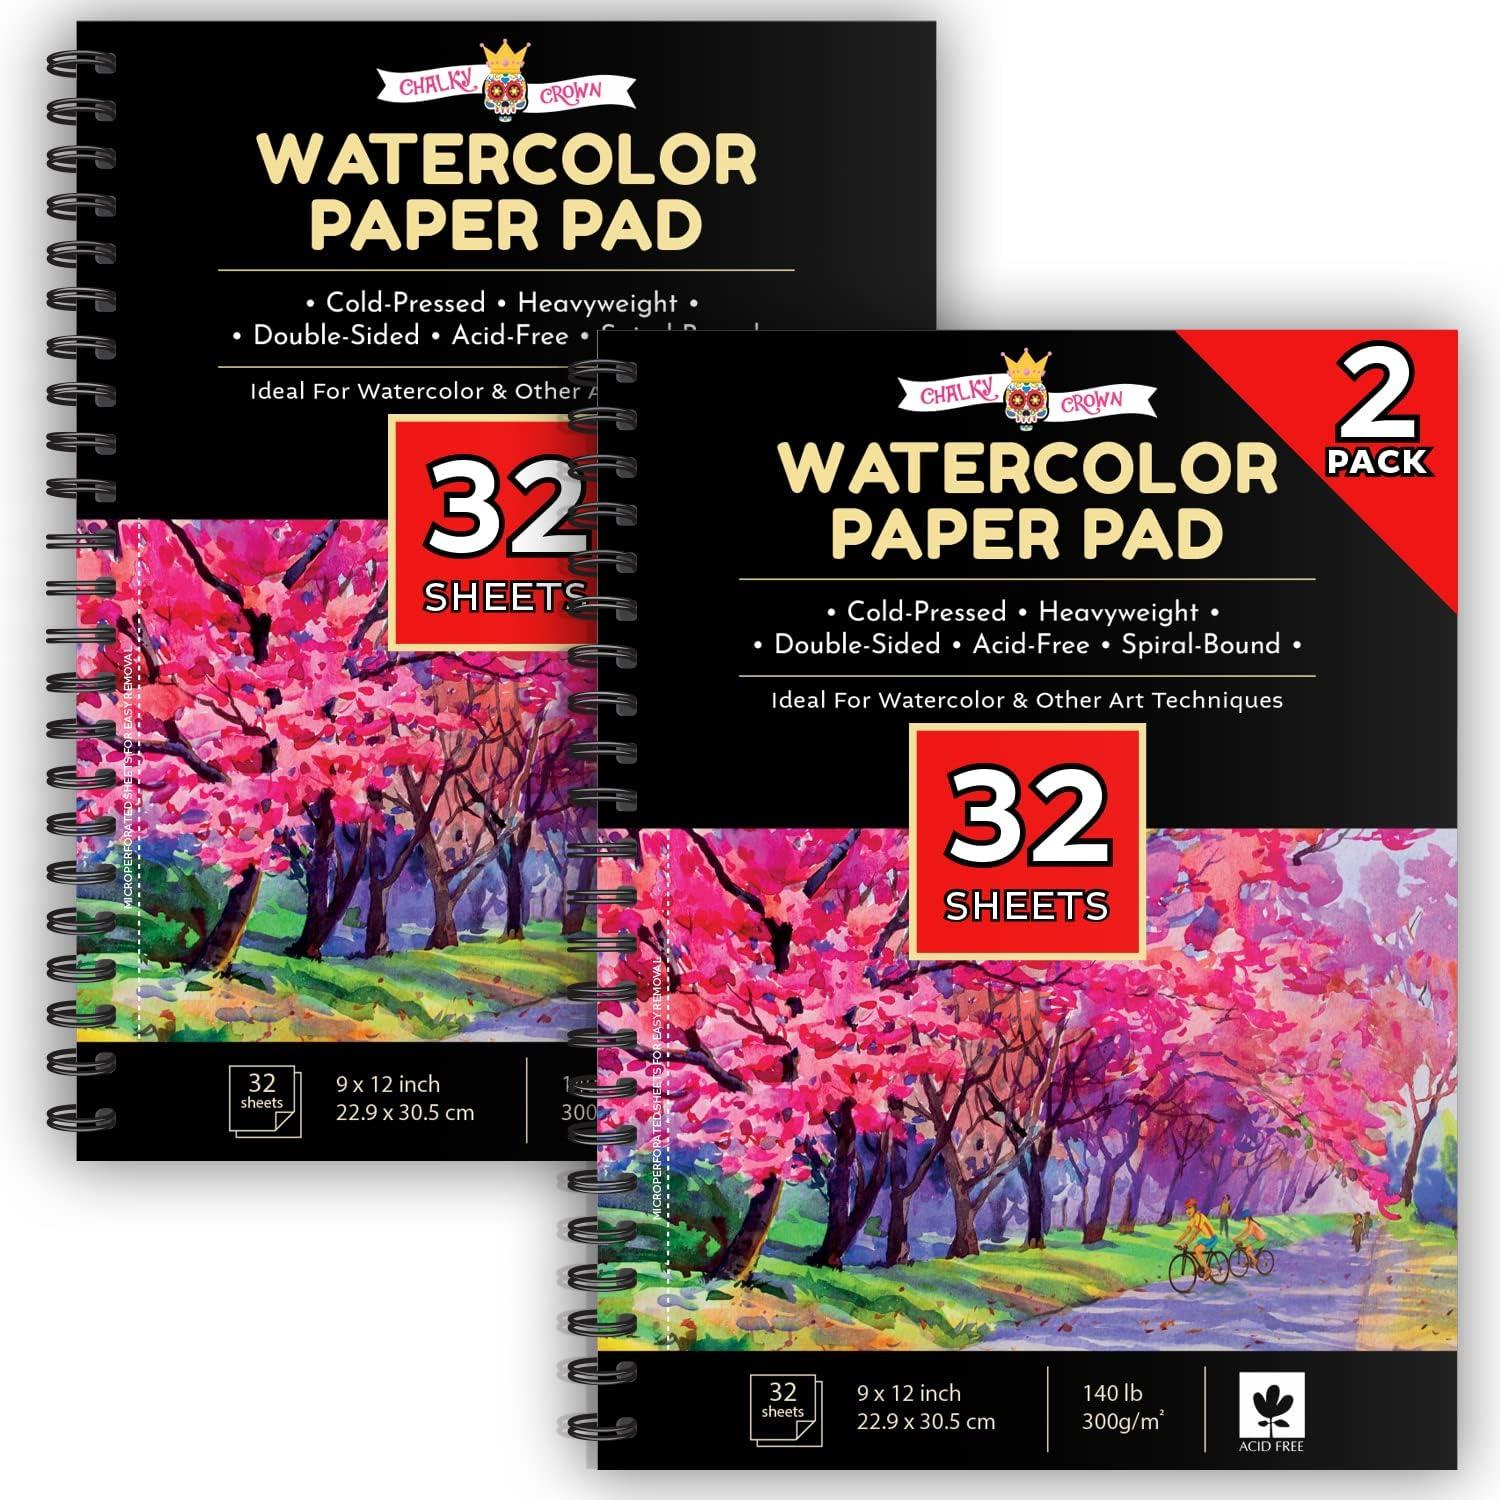 Arteza Watercolor Paper 9x12 inch, Pack of 2, 64 Sheets (140lb/300gsm), Cold Pressed